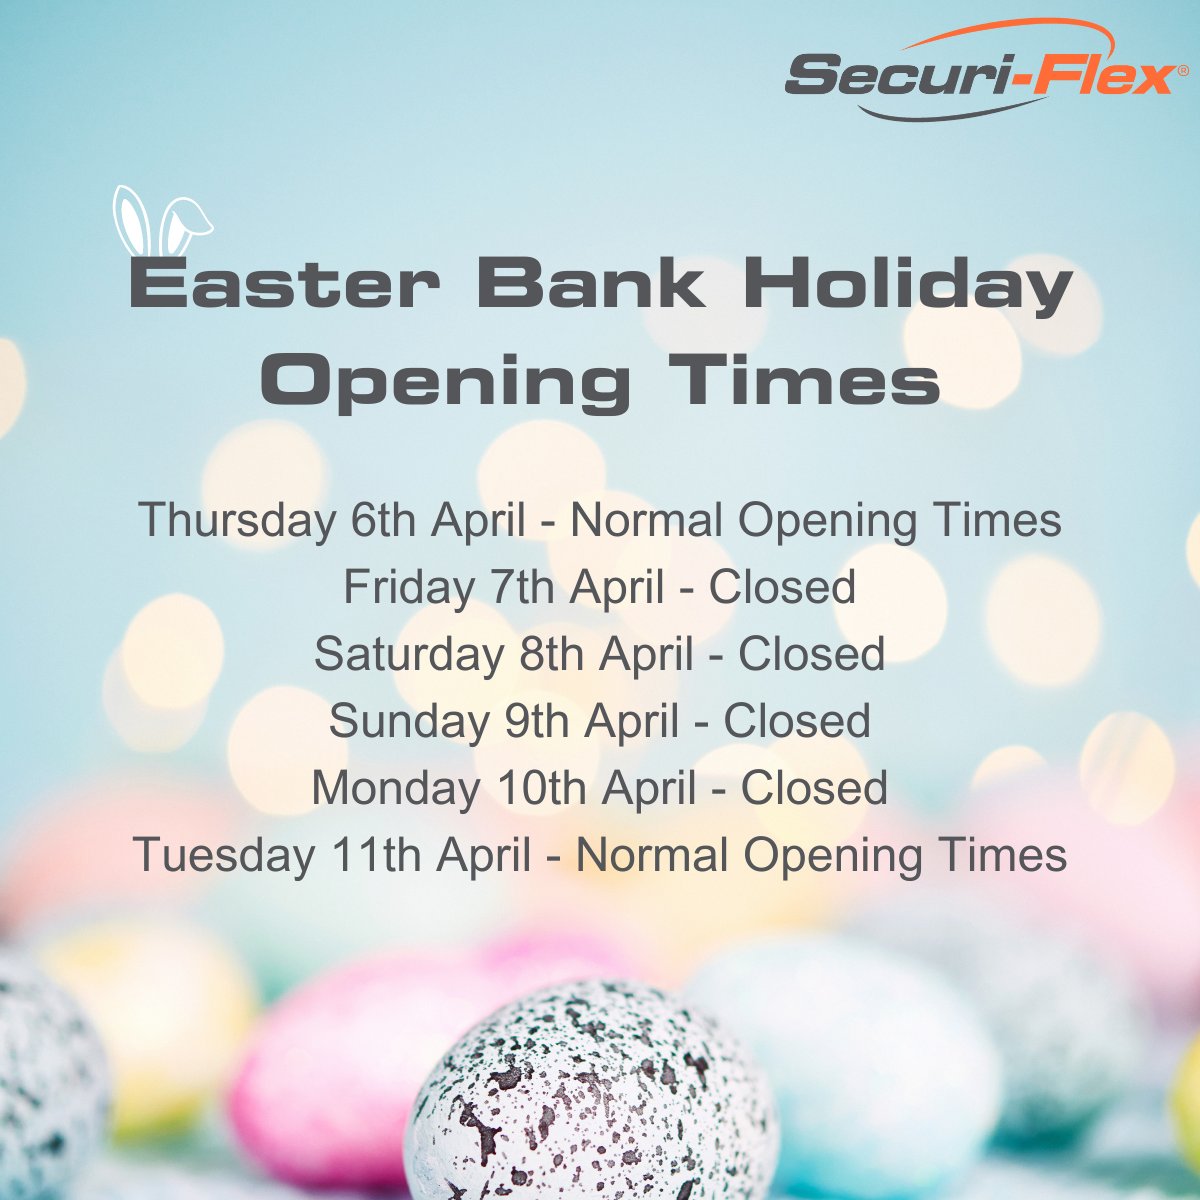 📷📷Please note Securi-Flex Ltd Easter Bank Holiday Opening Times.
Wishing you all a fantastic Easter Break from all the team at Securi-Flex®!
#bankholiday #easter #easter2023 #easterbreak #openinghours #sfx #teamsfx #securiflex